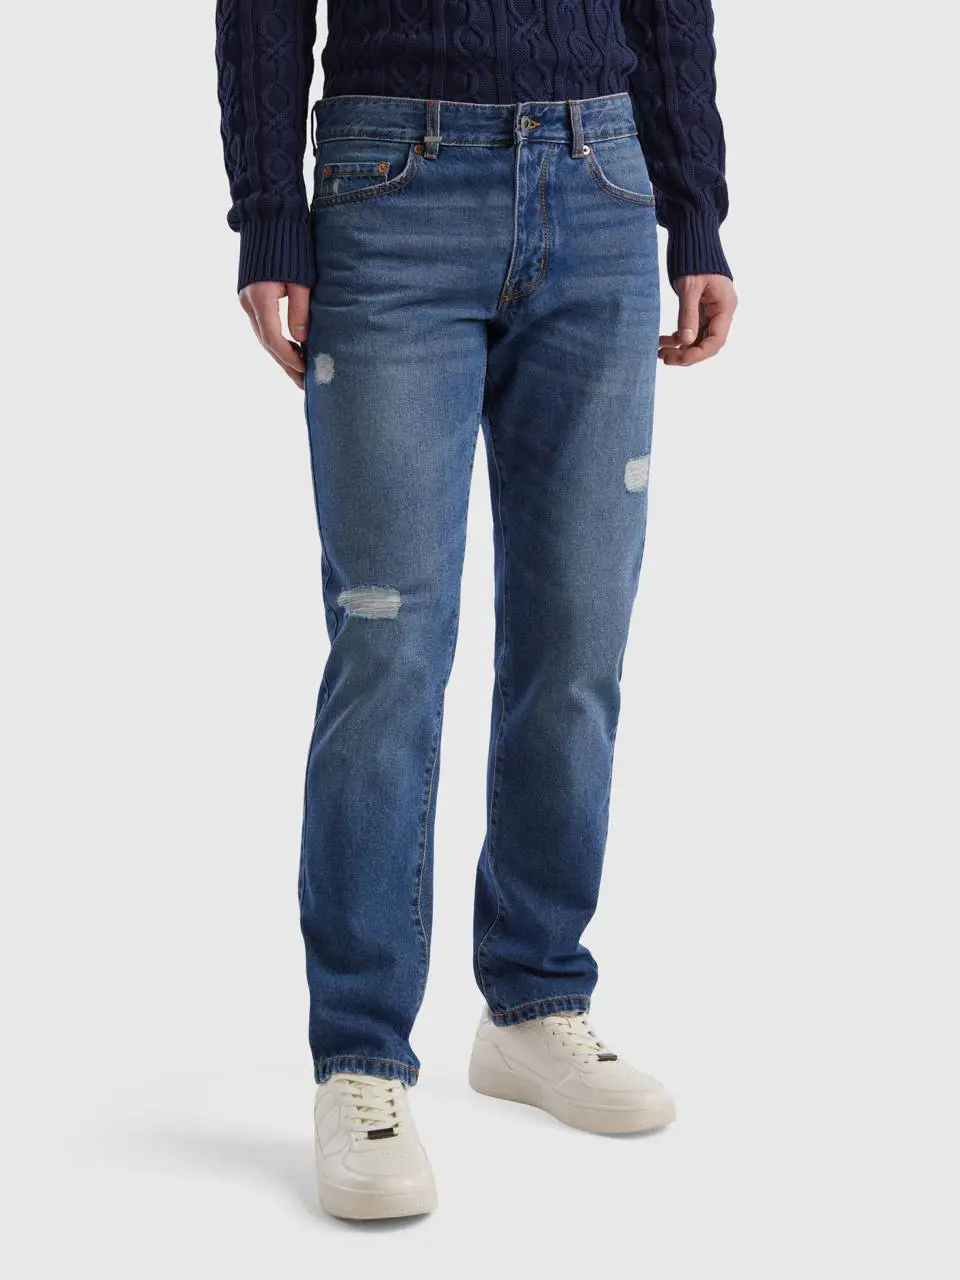 Benetton straight fit jeans. 1